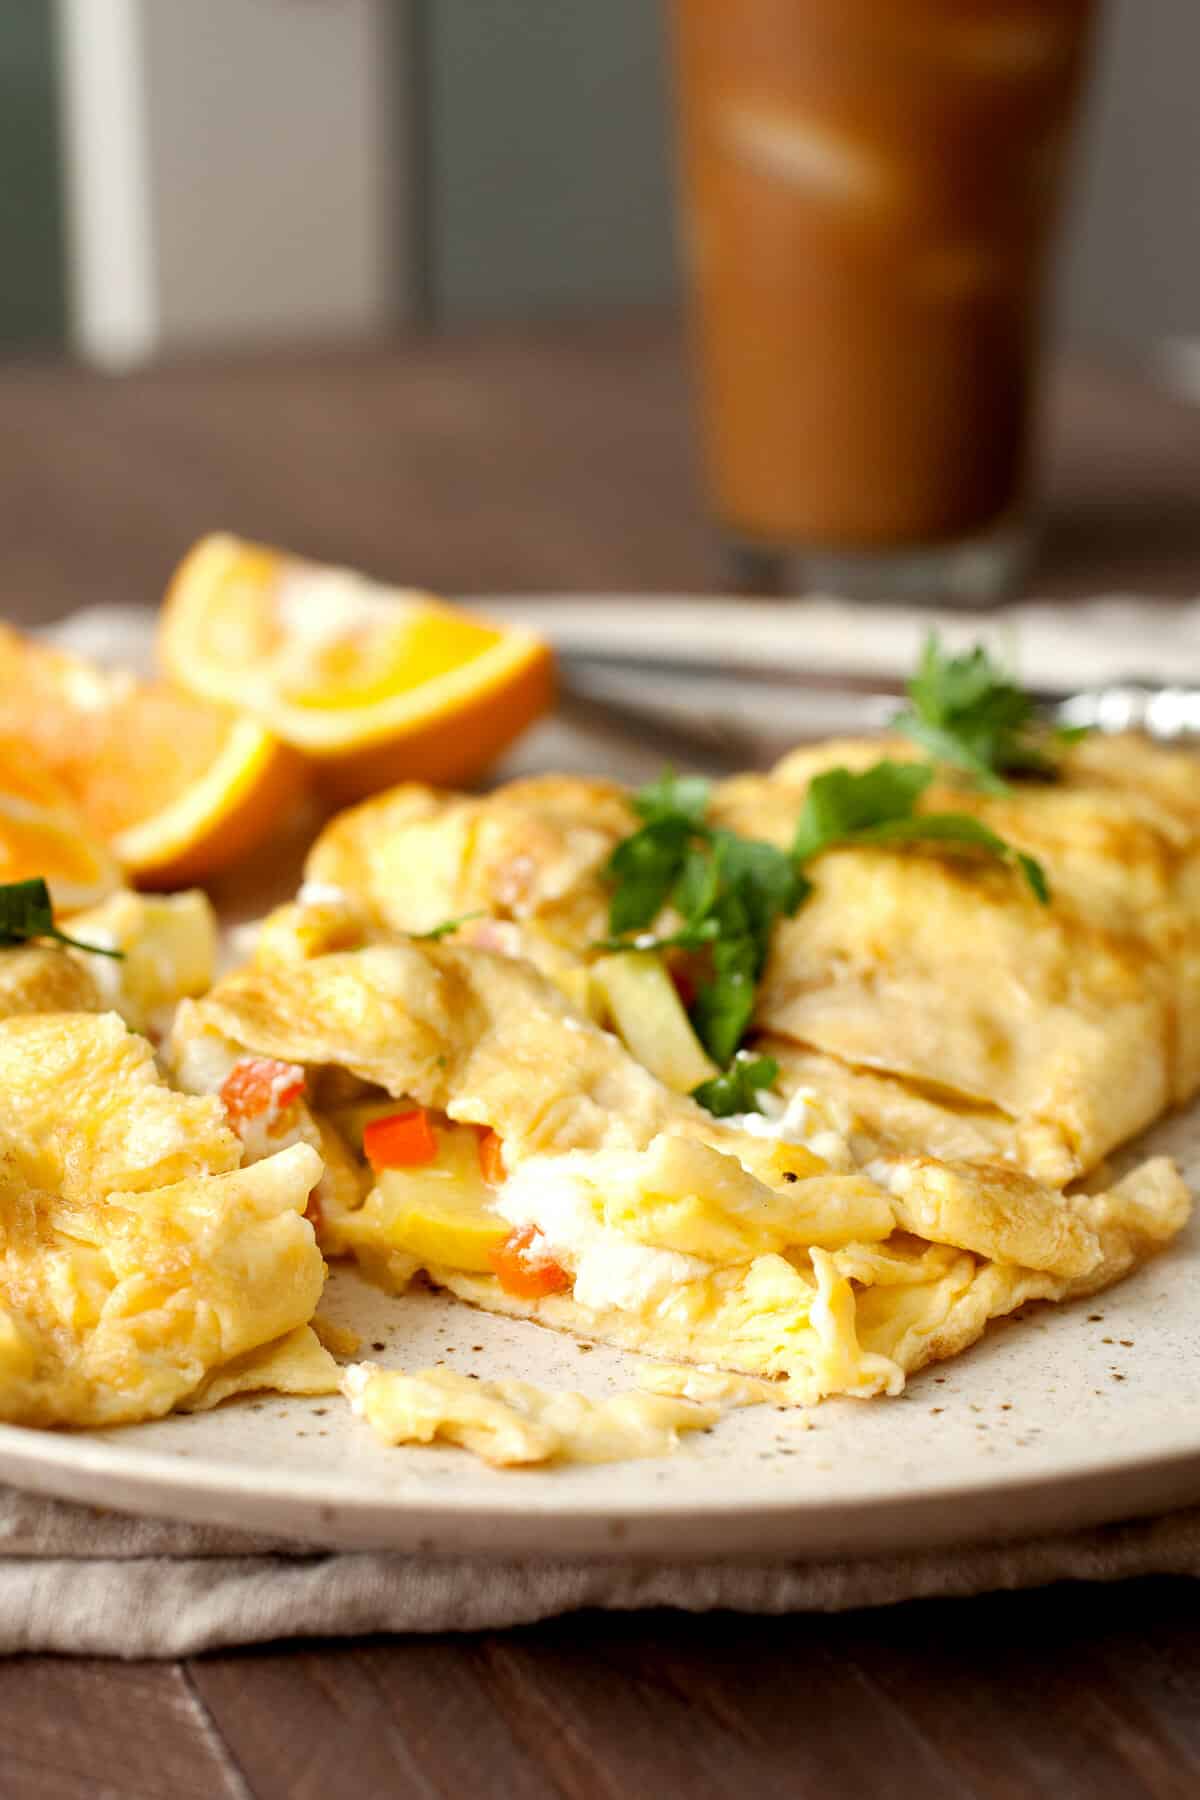 Diner-Style Griddle Omelet: This is how to make a super-packed diner-style omelet at home using your griddle! One of my favorite quick breakfasts! | macheesmo.com